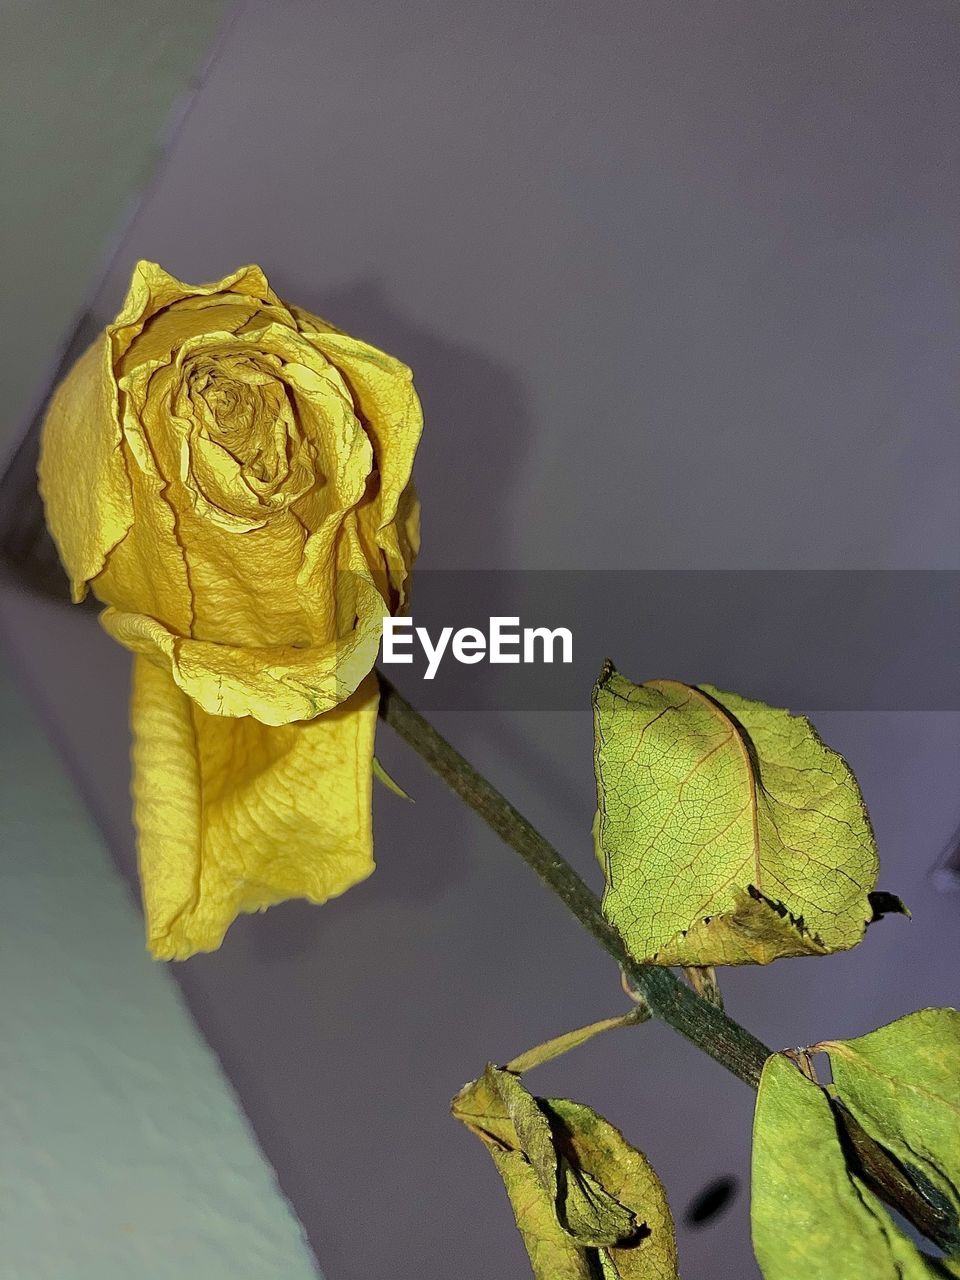 CLOSE-UP OF YELLOW ROSES ON PLANT